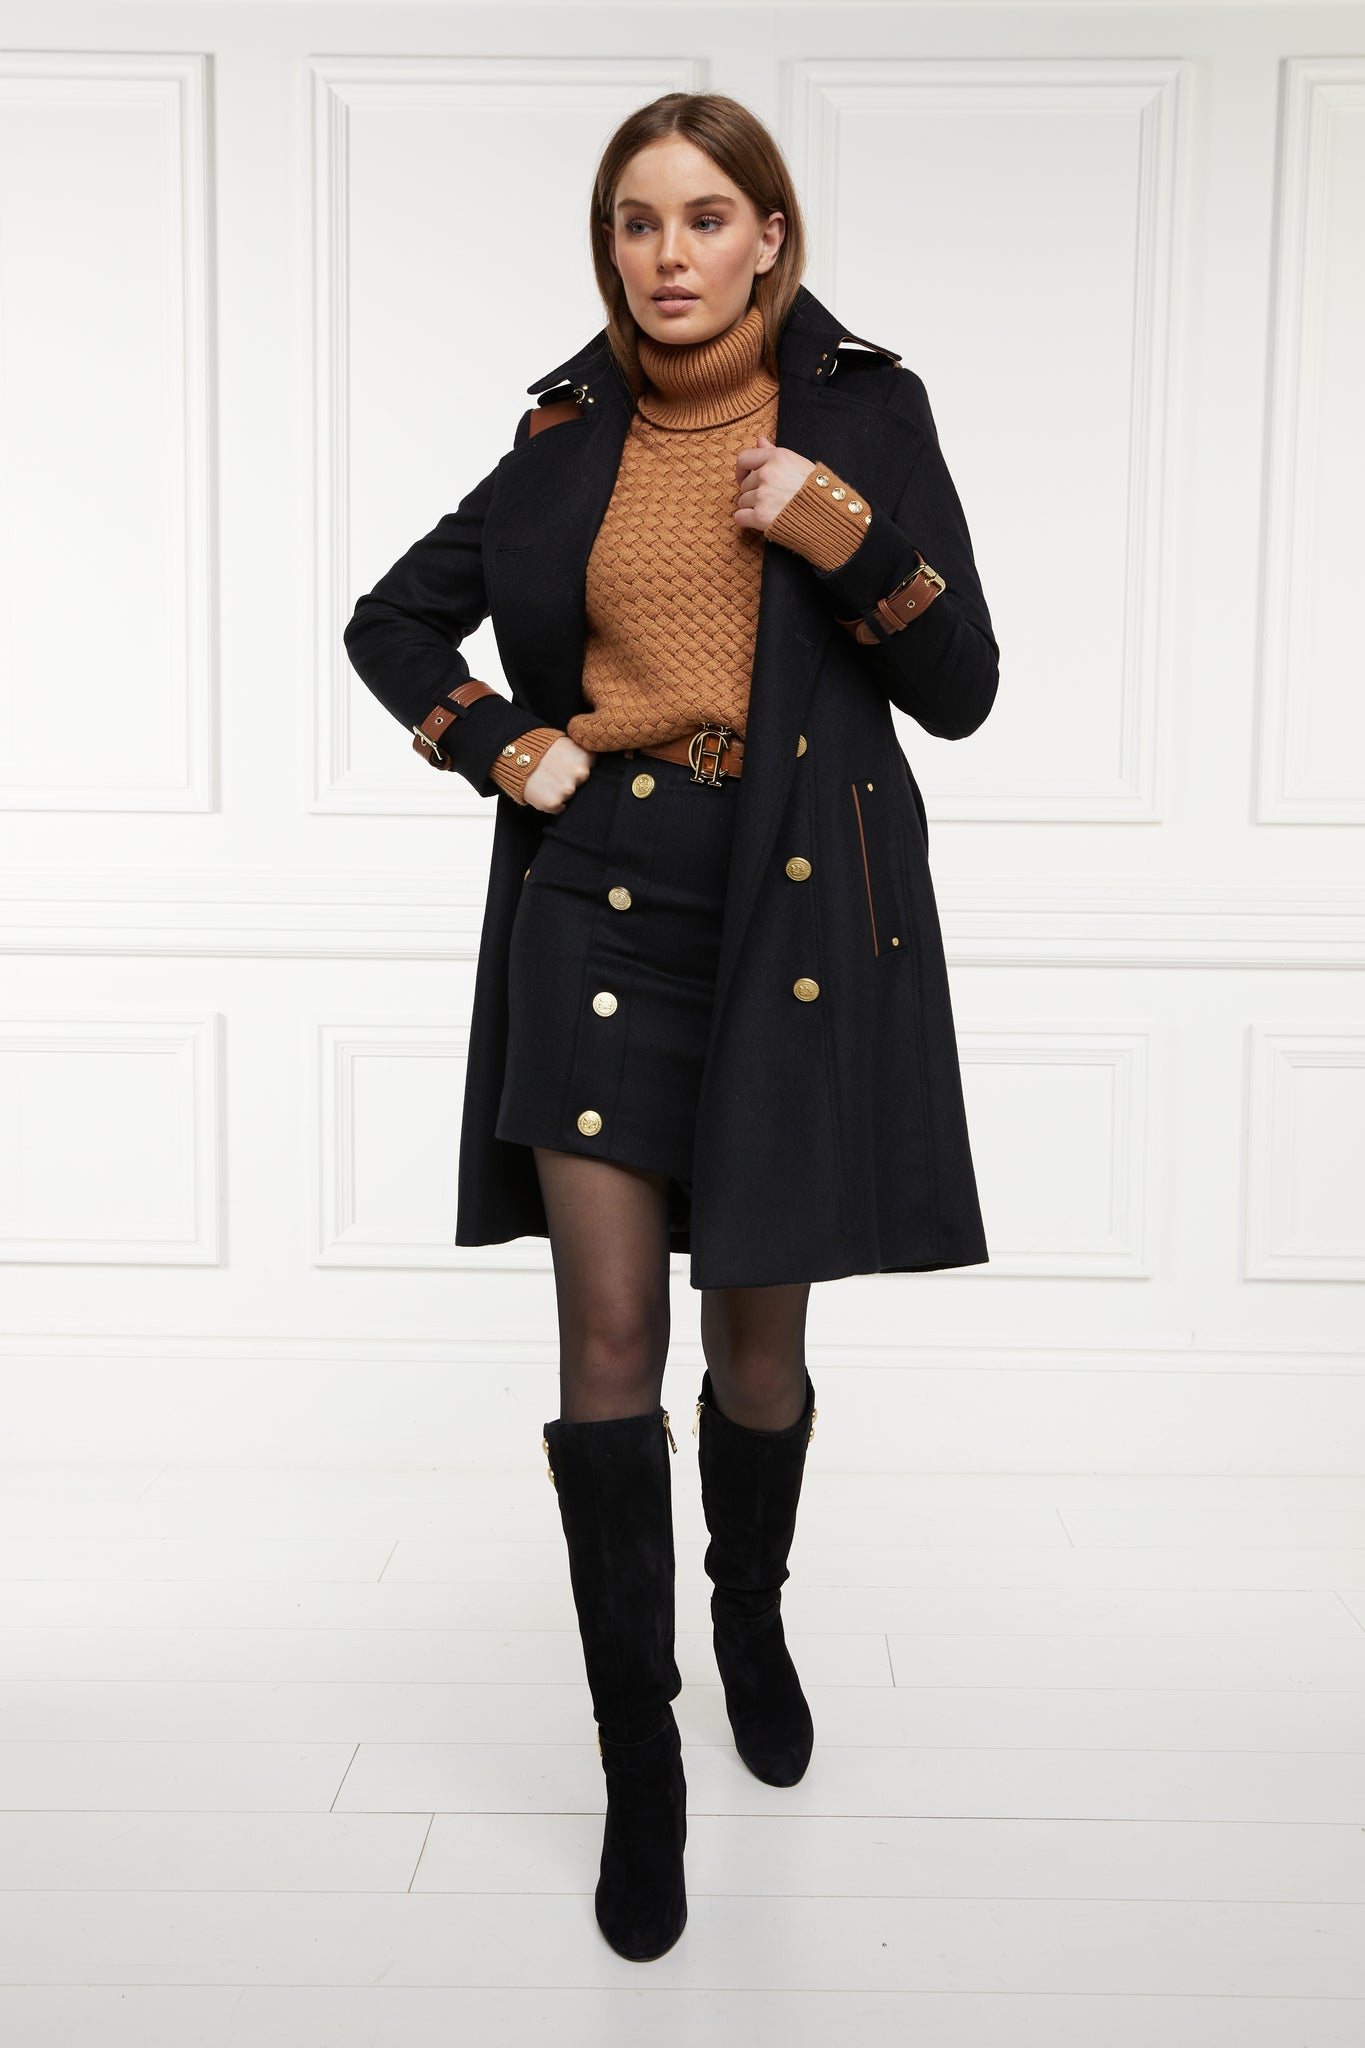 womens black and tan wool pencil mini skirt with concealed zip fastening on centre back and gold rivets down front worn with mid length trench coat in matching colourway